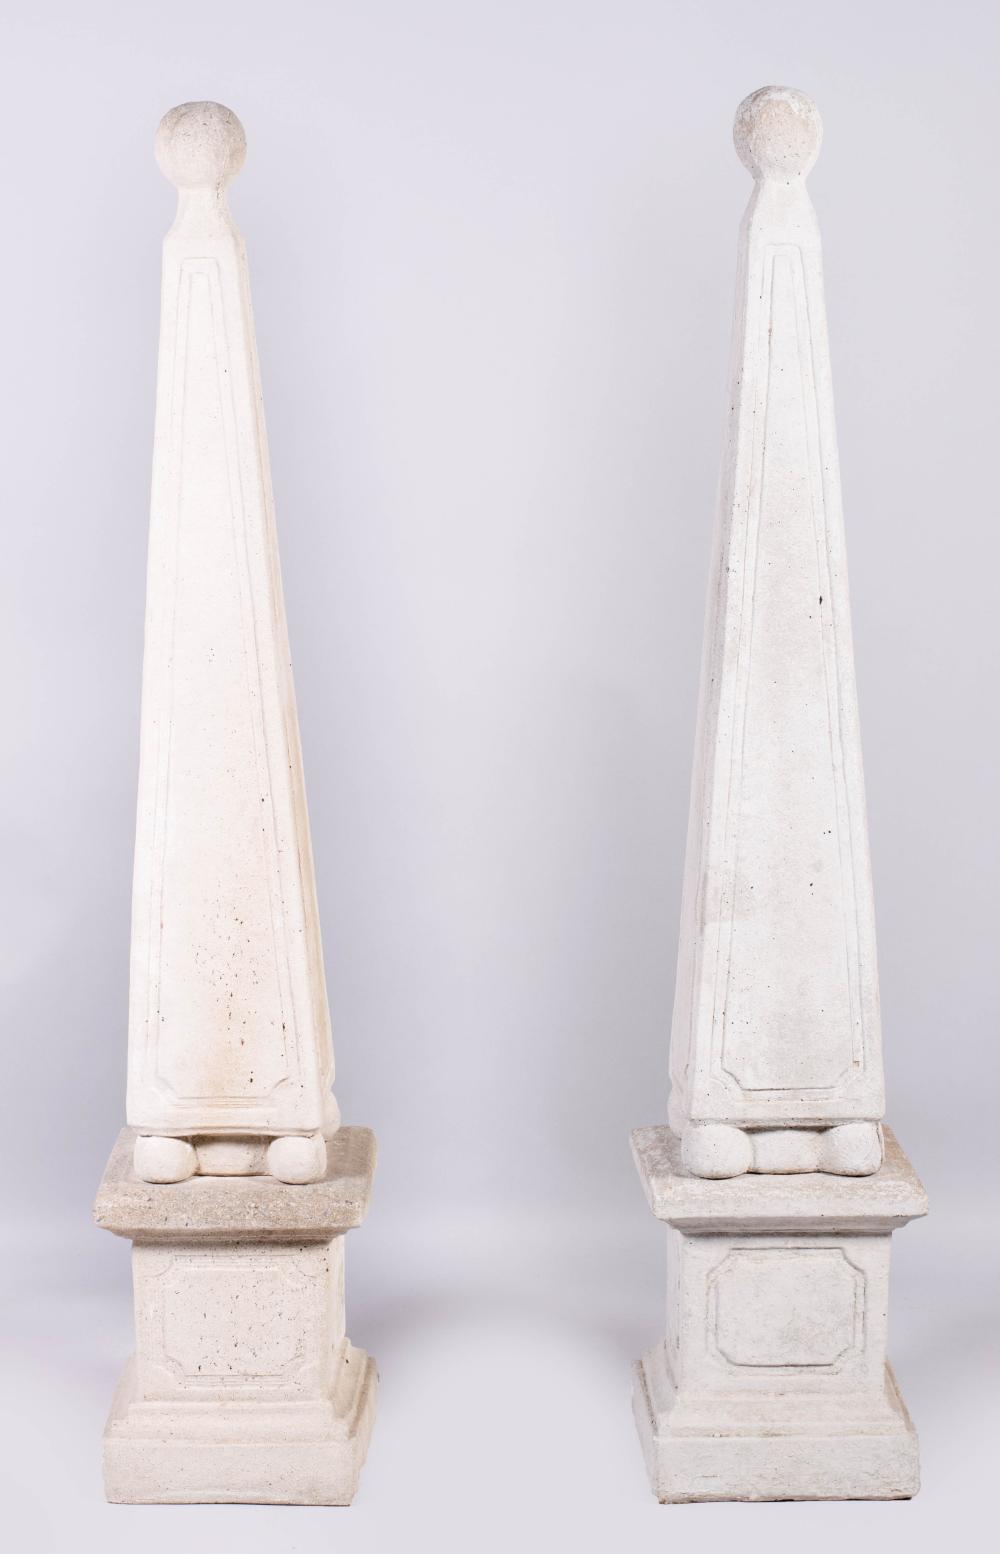 PAIR OF NEOCLASSICAL STYLE CAST 33c7e0